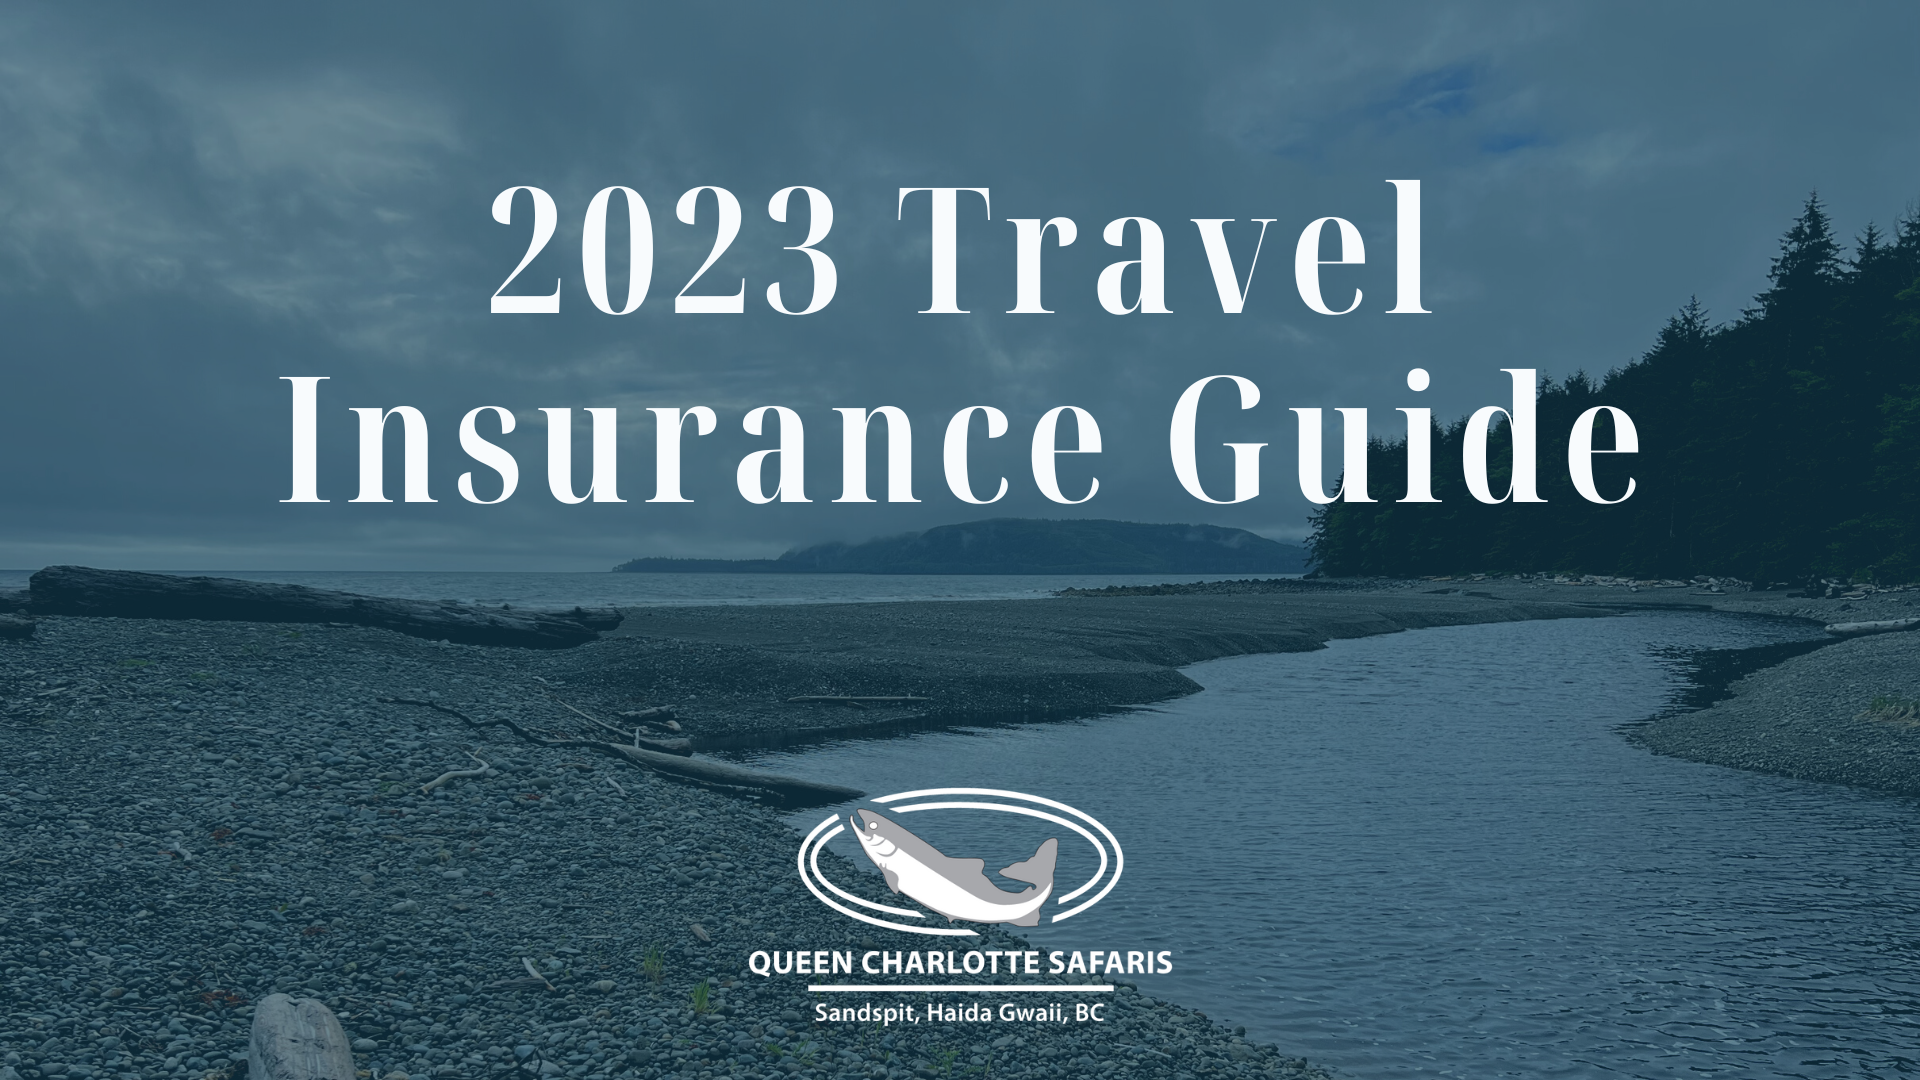 2023 Travel Insurance Guide Cover Photo